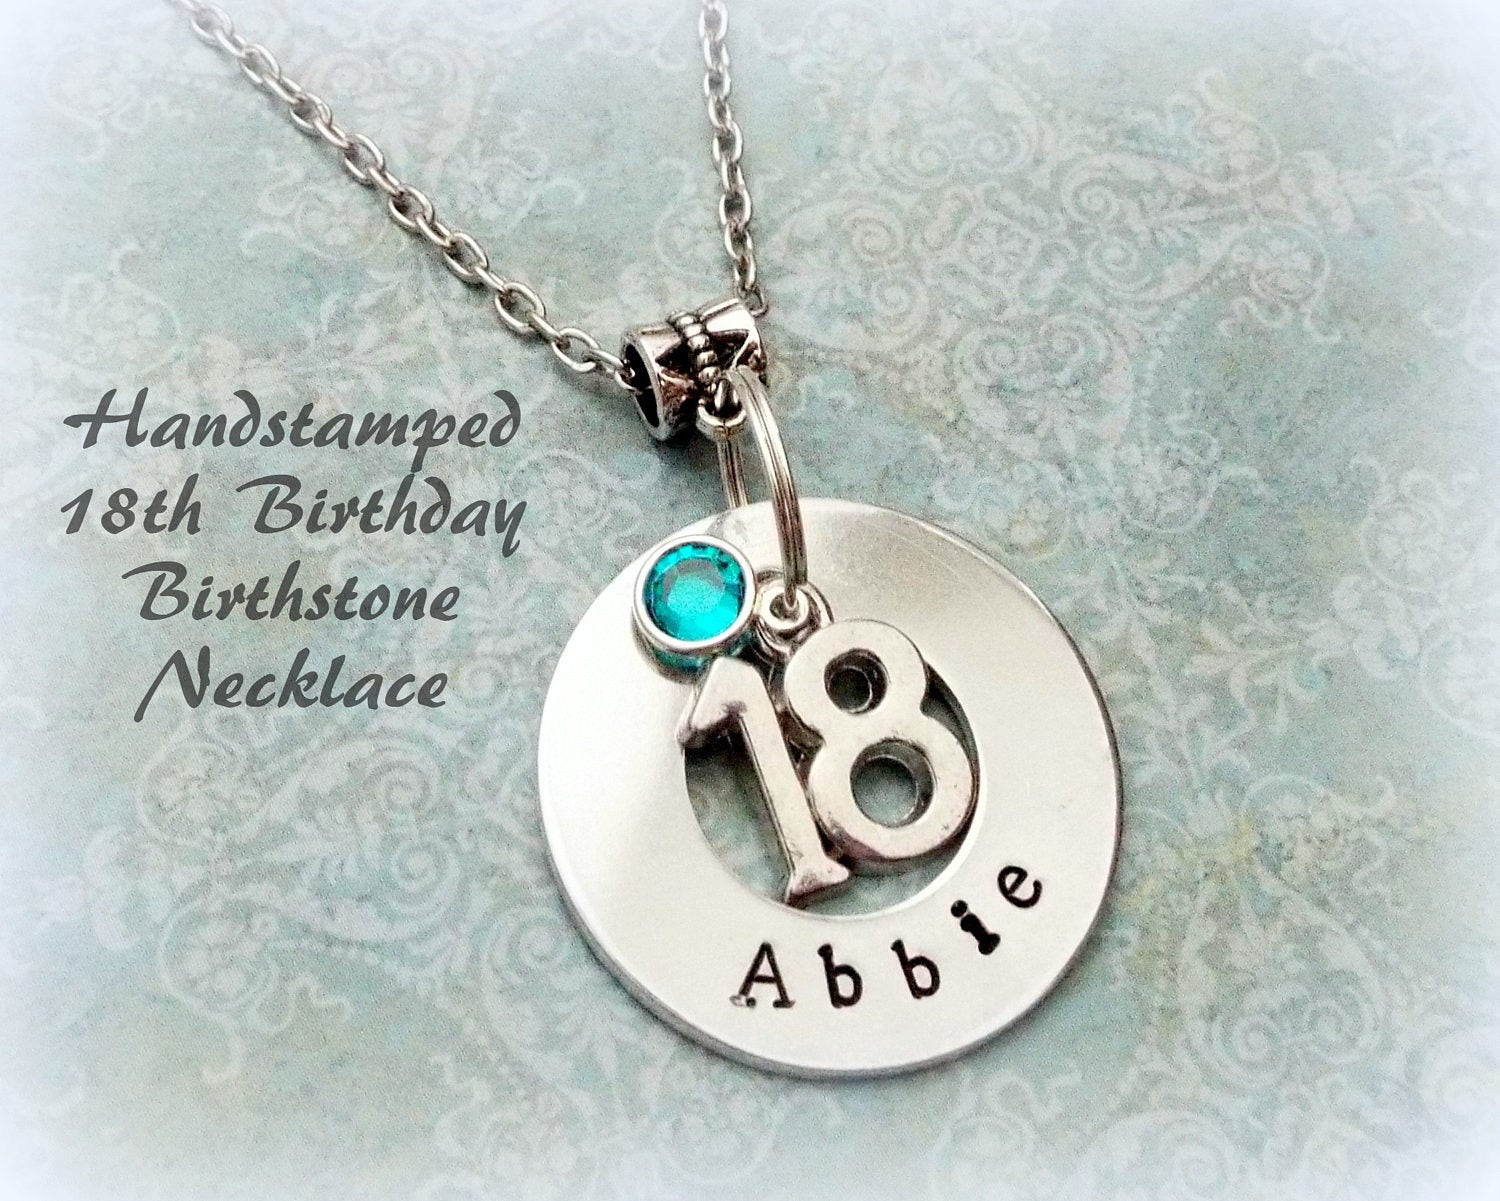 Female 18Th Birthday Gift Ideas
 18th Birthday Gift Personalized Handstamped Girl